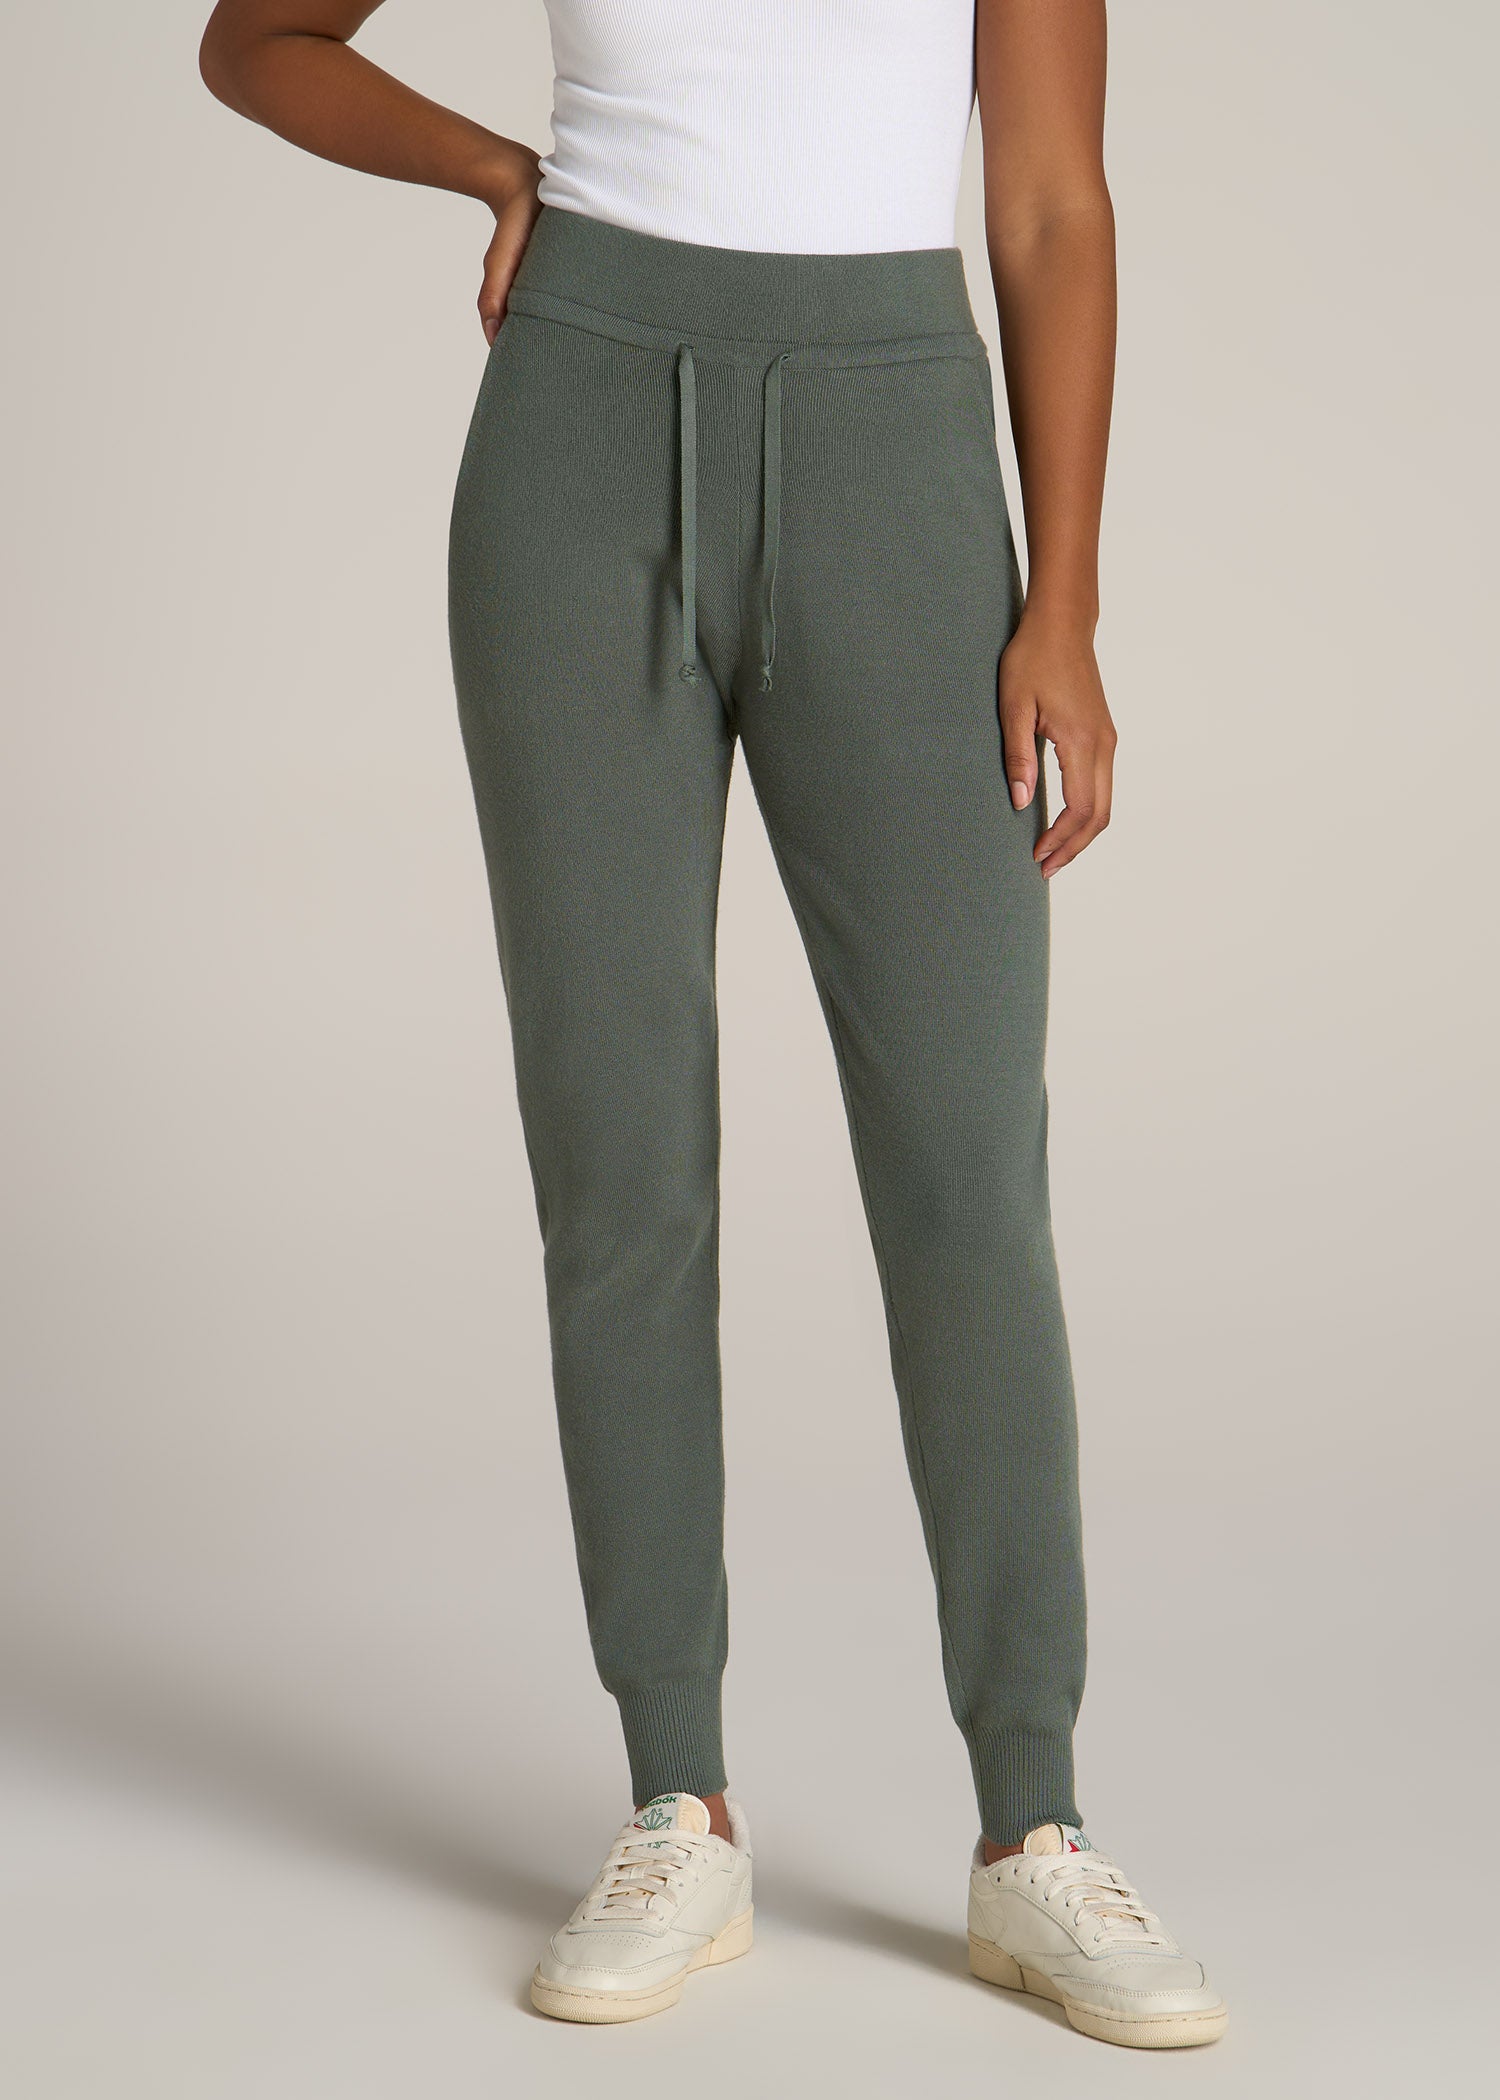 A tall woman wearing American Tall's Women's Tall Knit Lounge Jogger in the color Malachite Green.